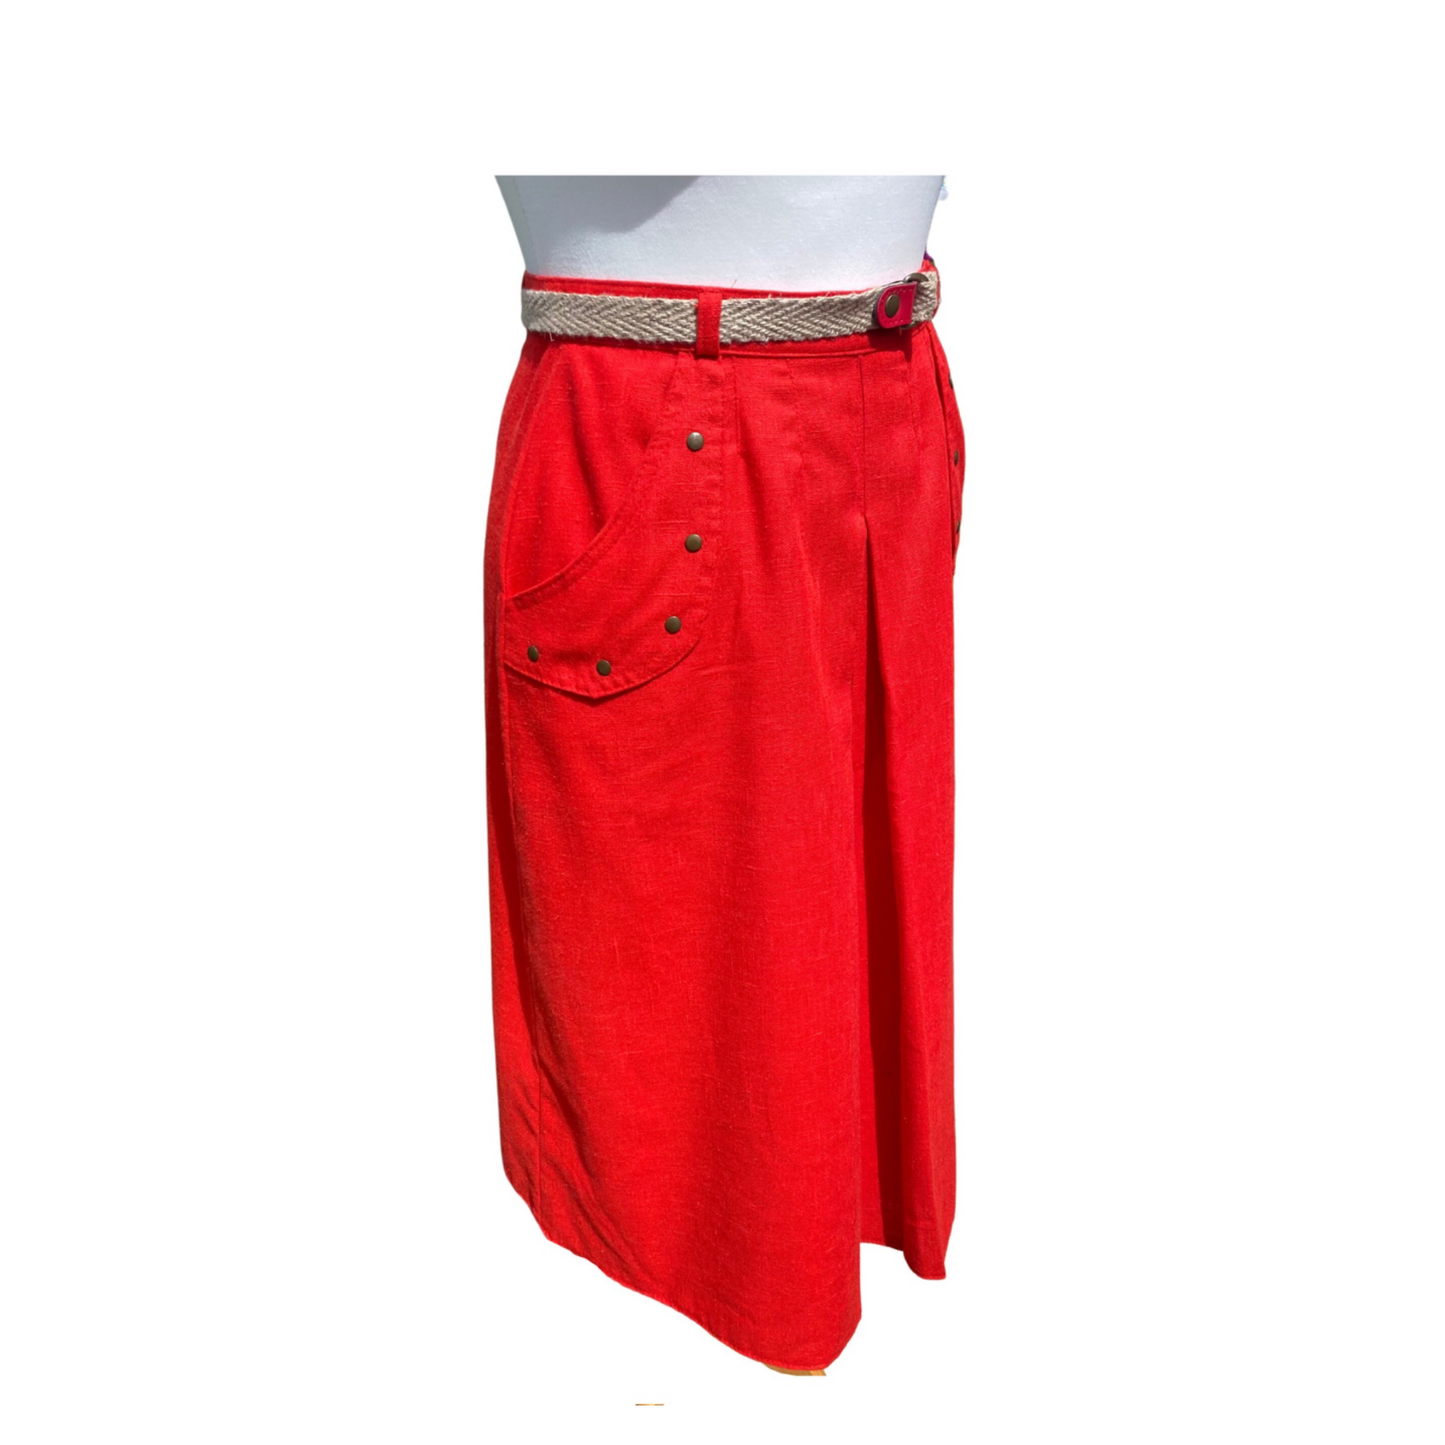 80s red midi skirt with matching jute belt. Approx UK size 8-10